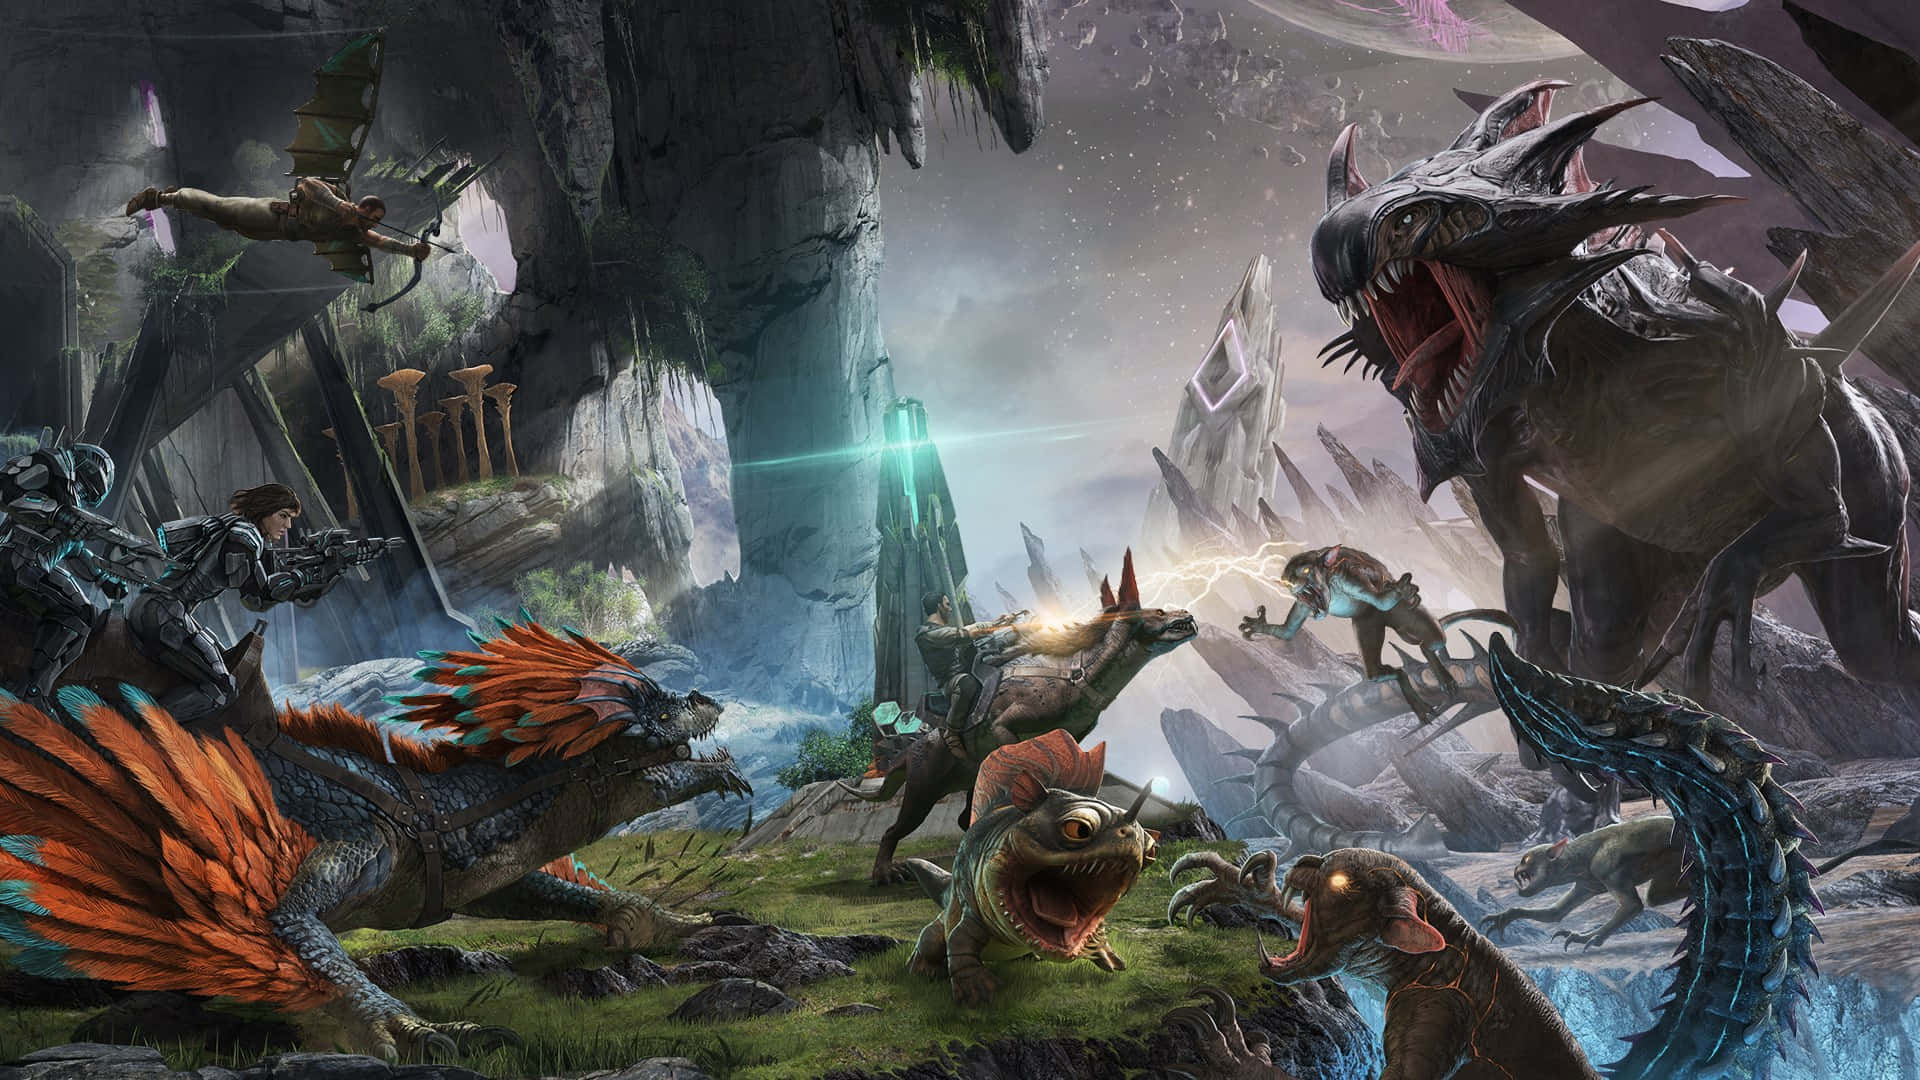 A Group Of Dinosaurs And Other Creatures Are In A Cave Wallpaper